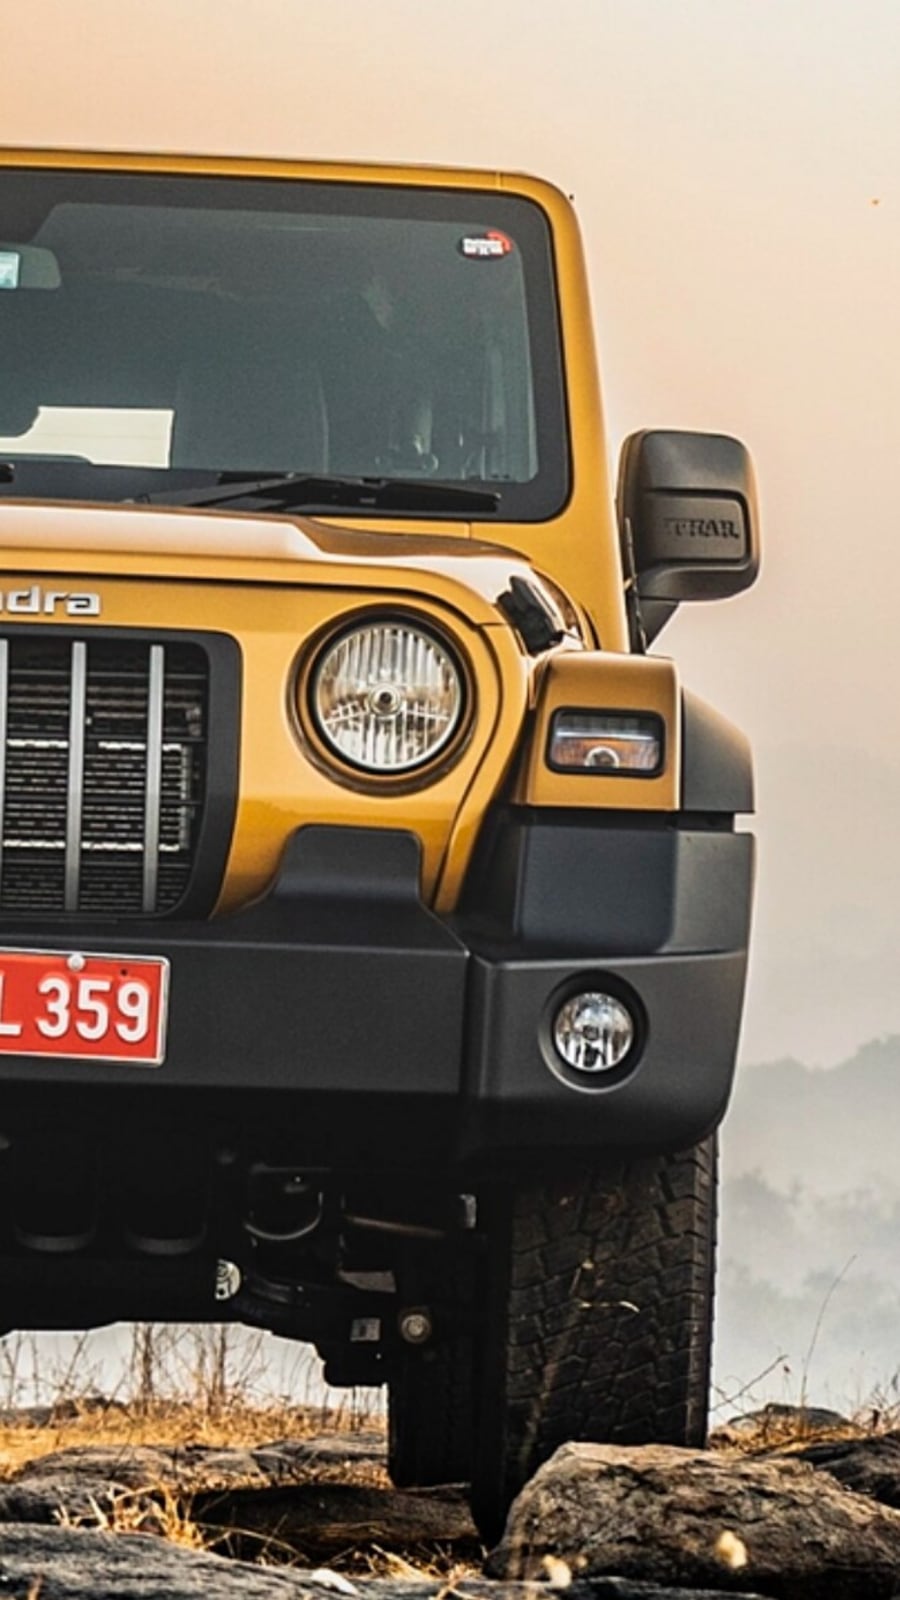 Discontinued Mahindra Thar [2014-2020] Price, Images, Colours & Reviews -  CarWale